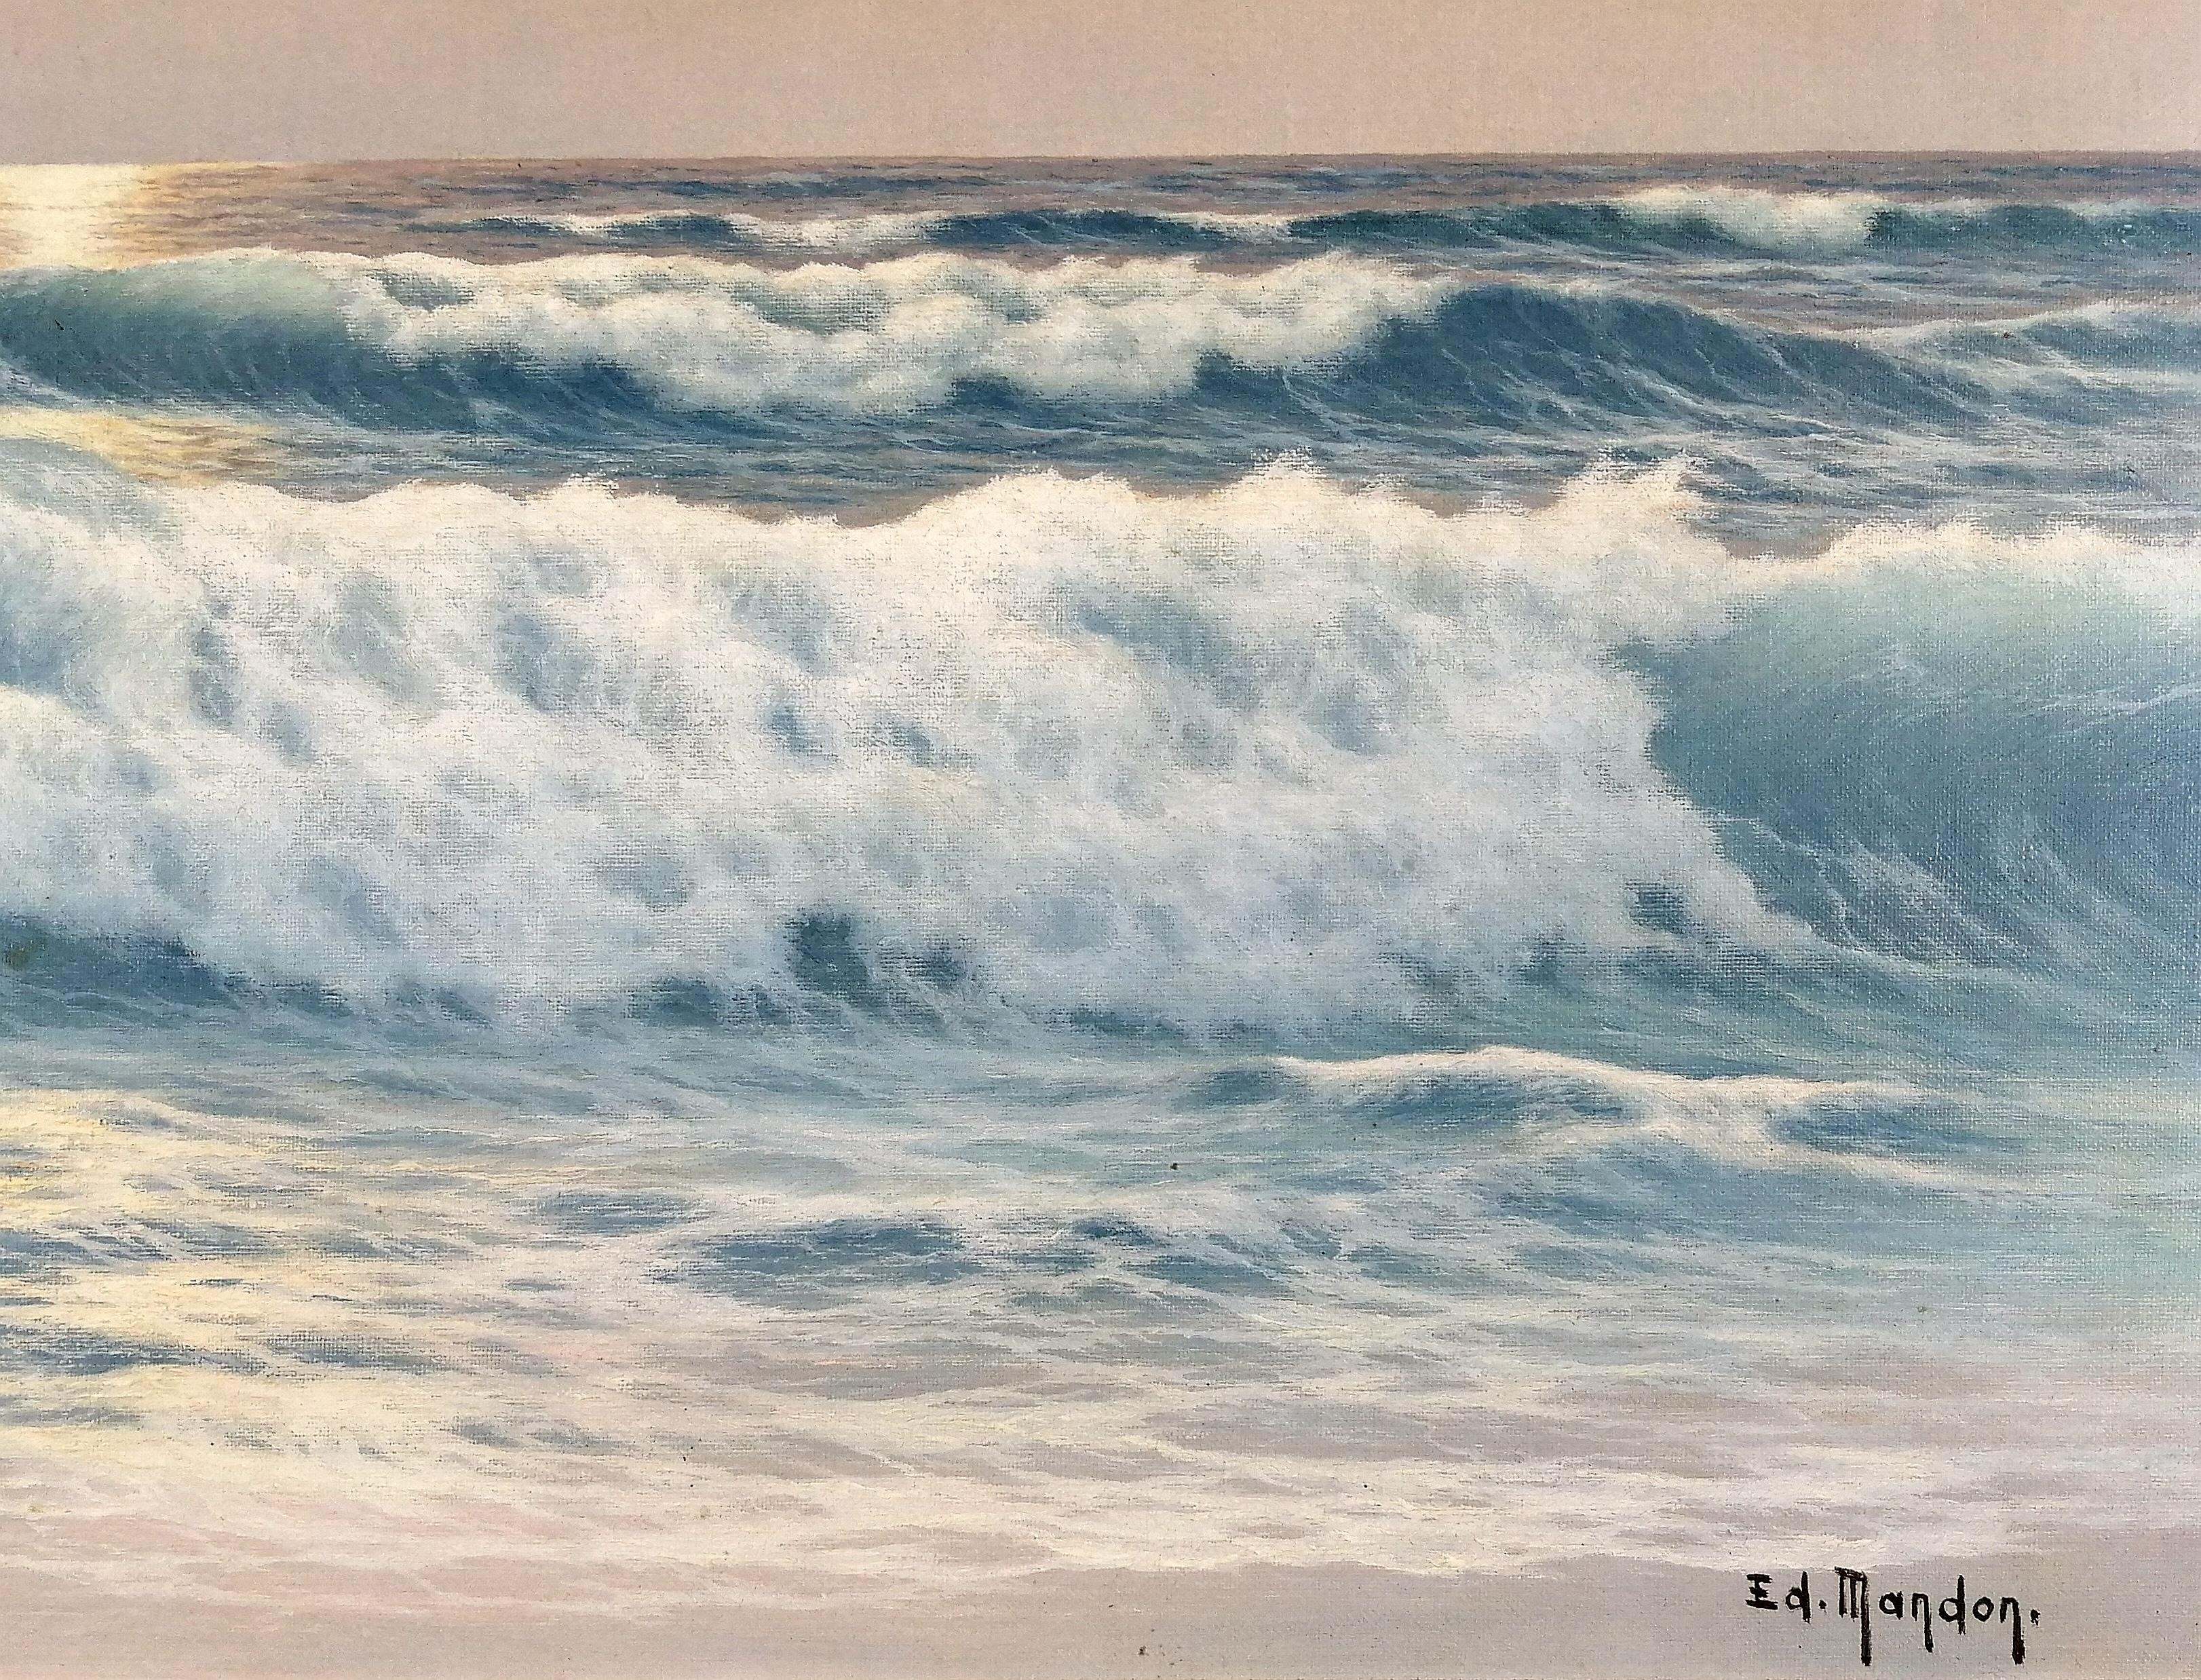 Sunset at Sea - Large French Marine Beach Seascape Oil on Canvas Painting For Sale 2